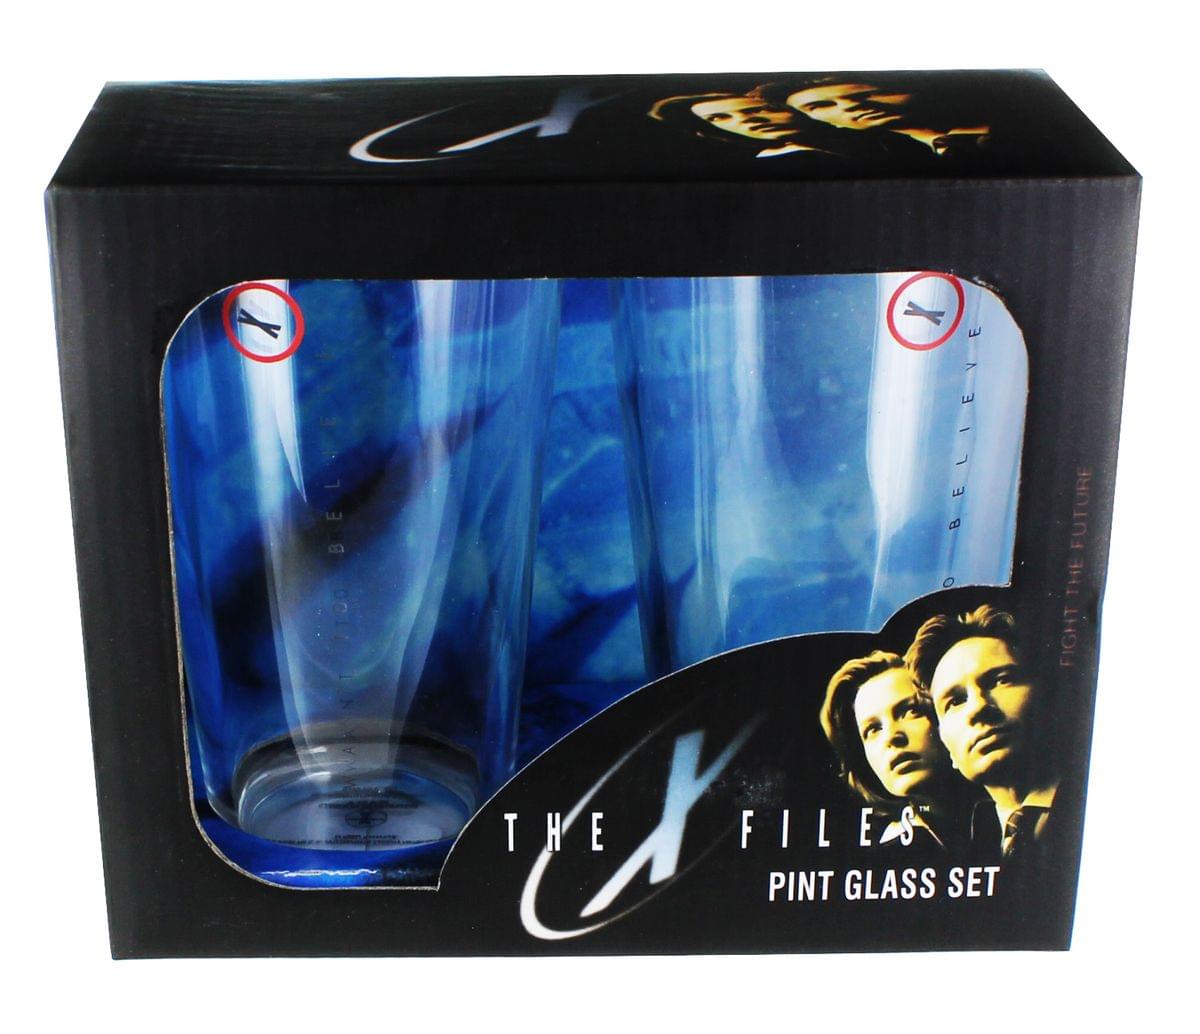 The X Files "I Want to Believe" Pint Glass Set